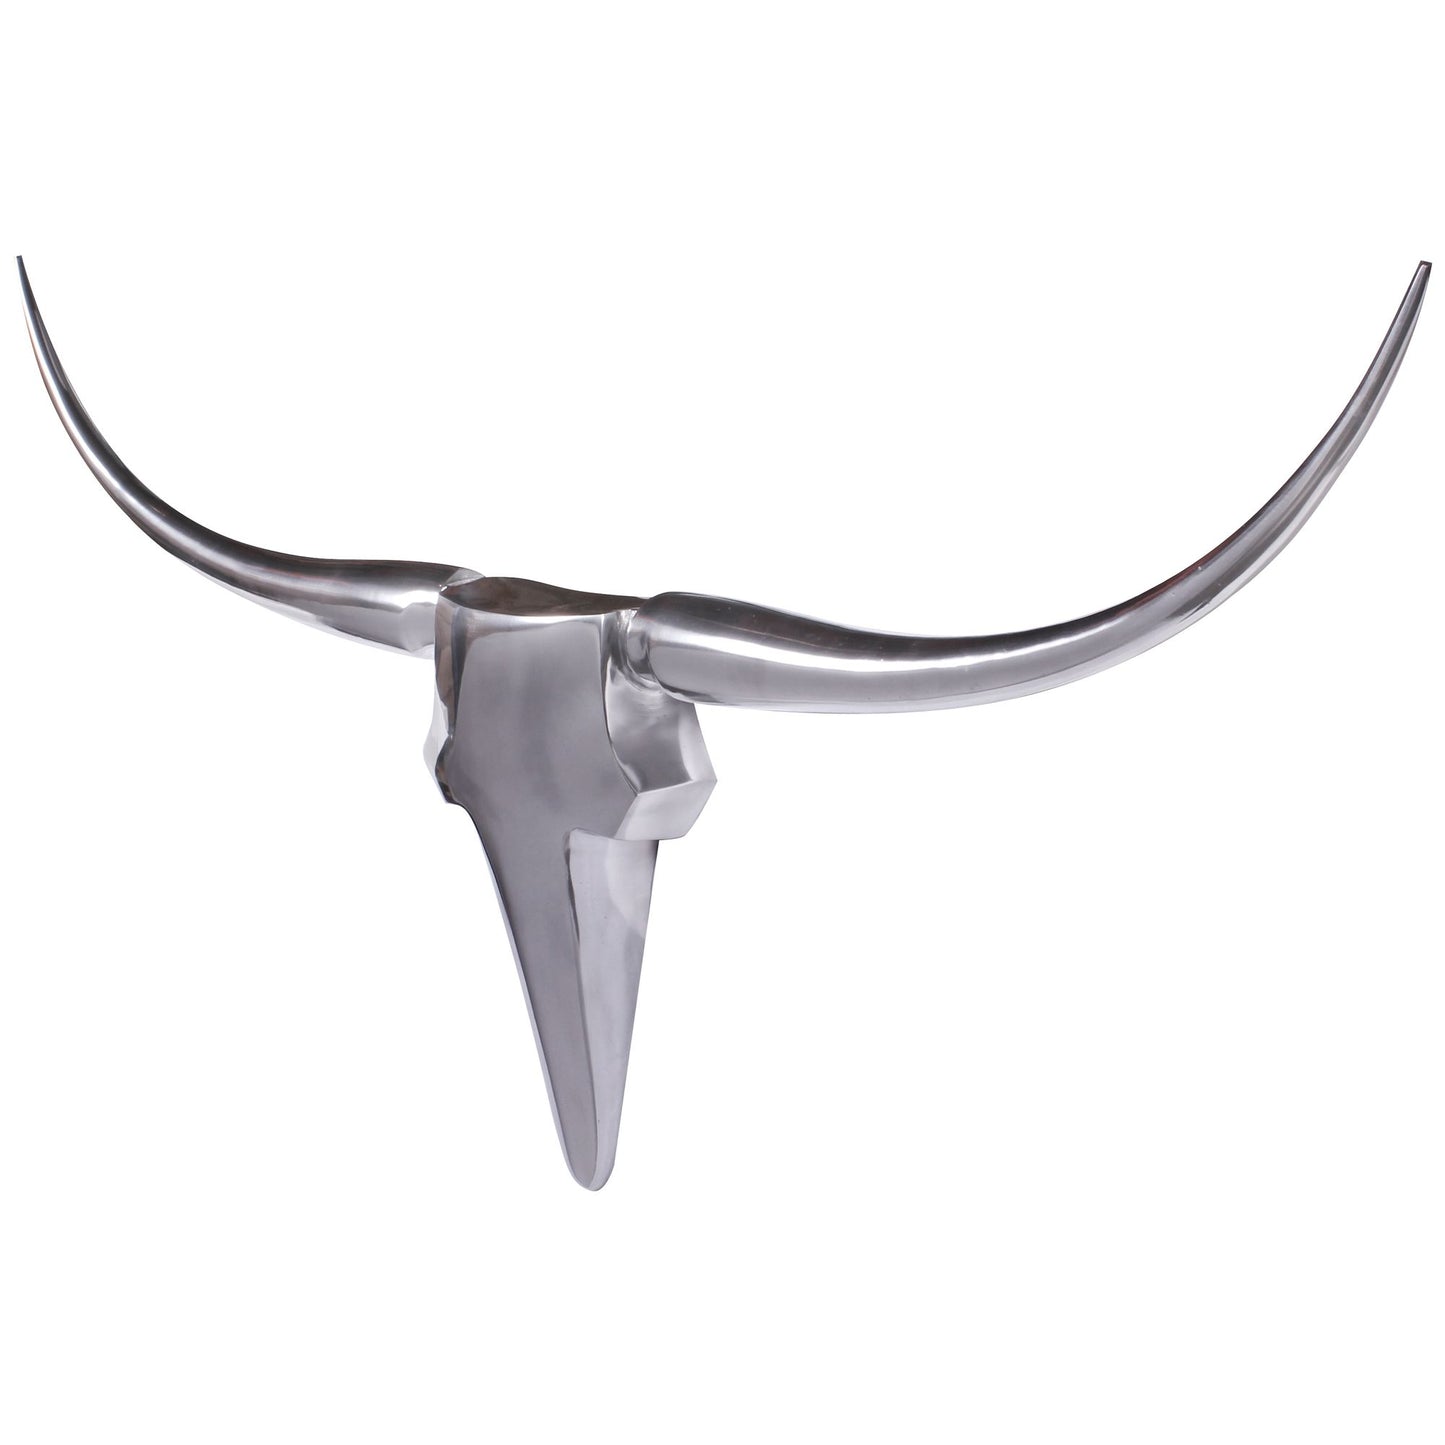 Nancy's Bull Antlers L Decoration - Wall Decoration - Wall Decoration - Wall Antlers - Aluminum - Silver